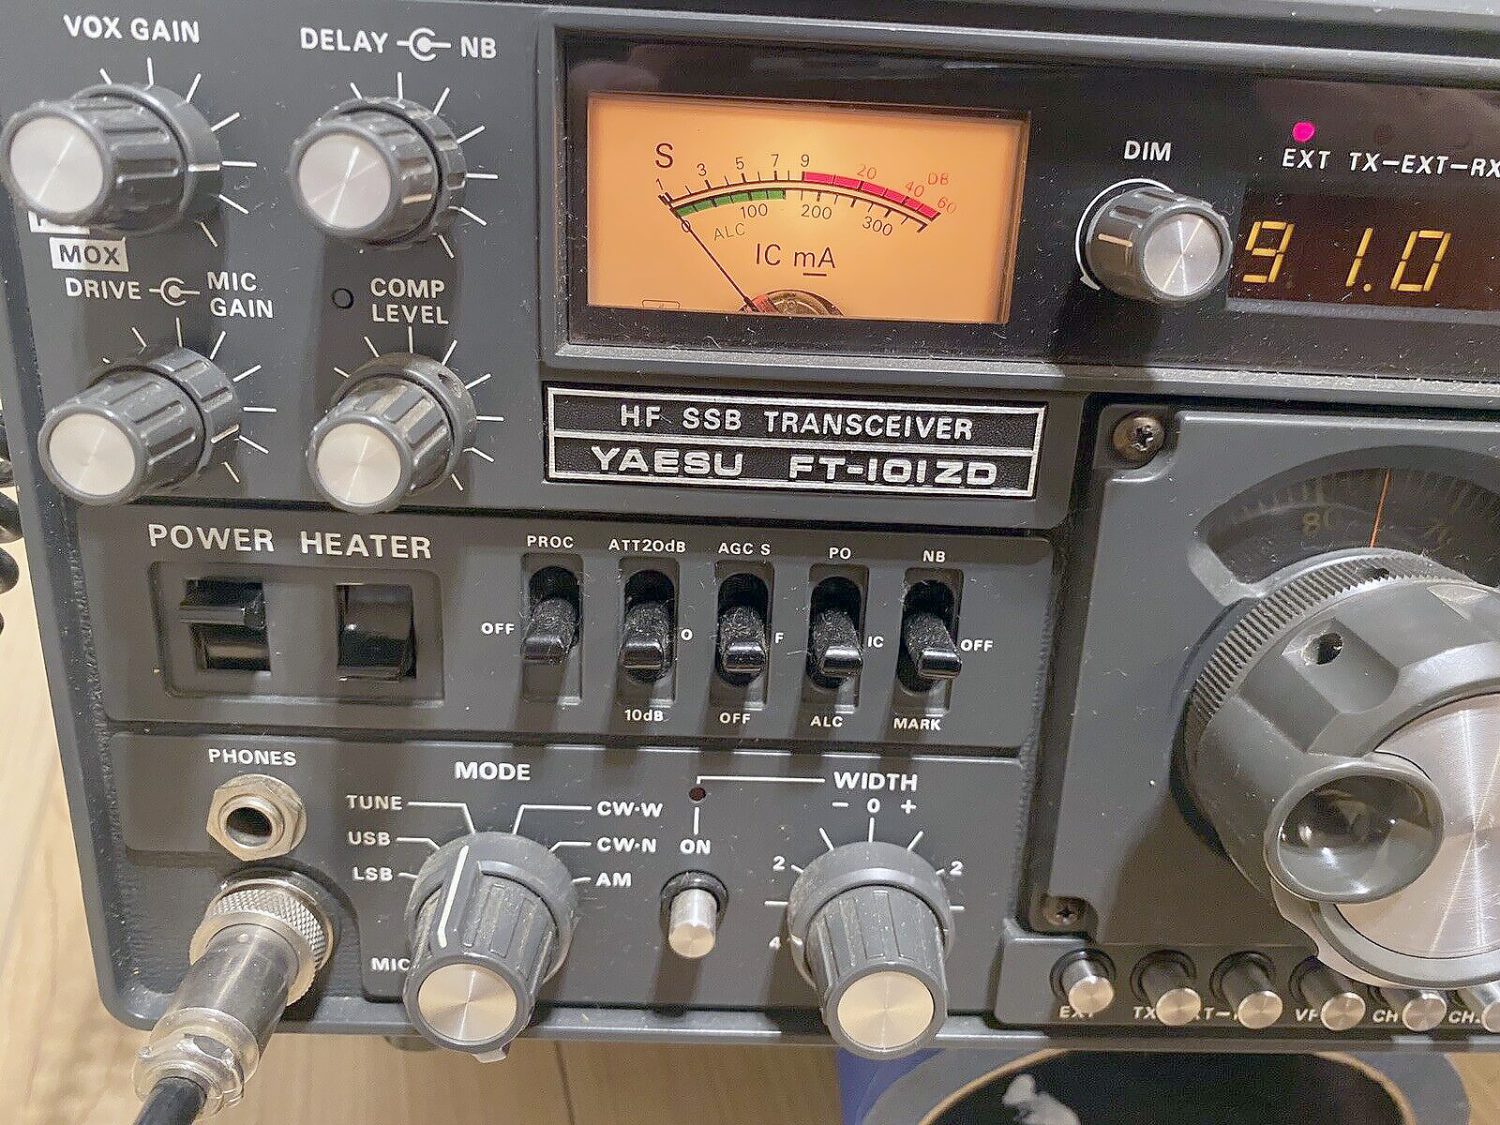 Close-up of the Yaesu FT-101ZD Front Panel.